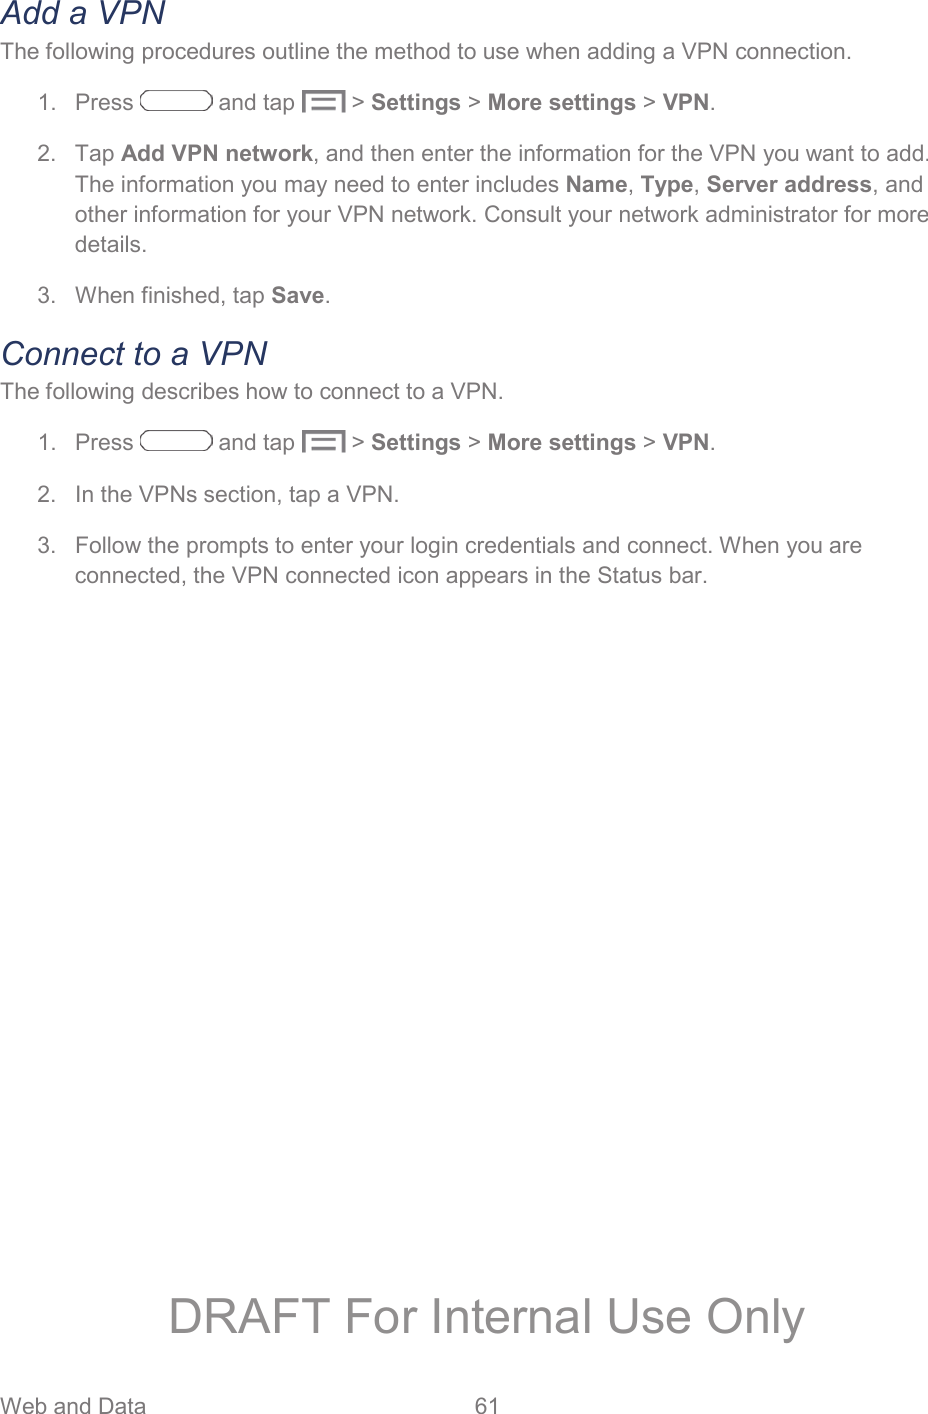 Web and Data  61   Add a VPN The following procedures outline the method to use when adding a VPN connection. 1. Press   and tap  &gt; Settings &gt; More settings &gt; VPN. 2. Tap Add VPN network, and then enter the information for the VPN you want to add. The information you may need to enter includes Name, Type, Server address, and other information for your VPN network. Consult your network administrator for more details. 3.  When finished, tap Save. Connect to a VPN The following describes how to connect to a VPN. 1. Press   and tap  &gt; Settings &gt; More settings &gt; VPN. 2.  In the VPNs section, tap a VPN. 3.  Follow the prompts to enter your login credentials and connect. When you are connected, the VPN connected icon appears in the Status bar. DRAFT For Internal Use Only